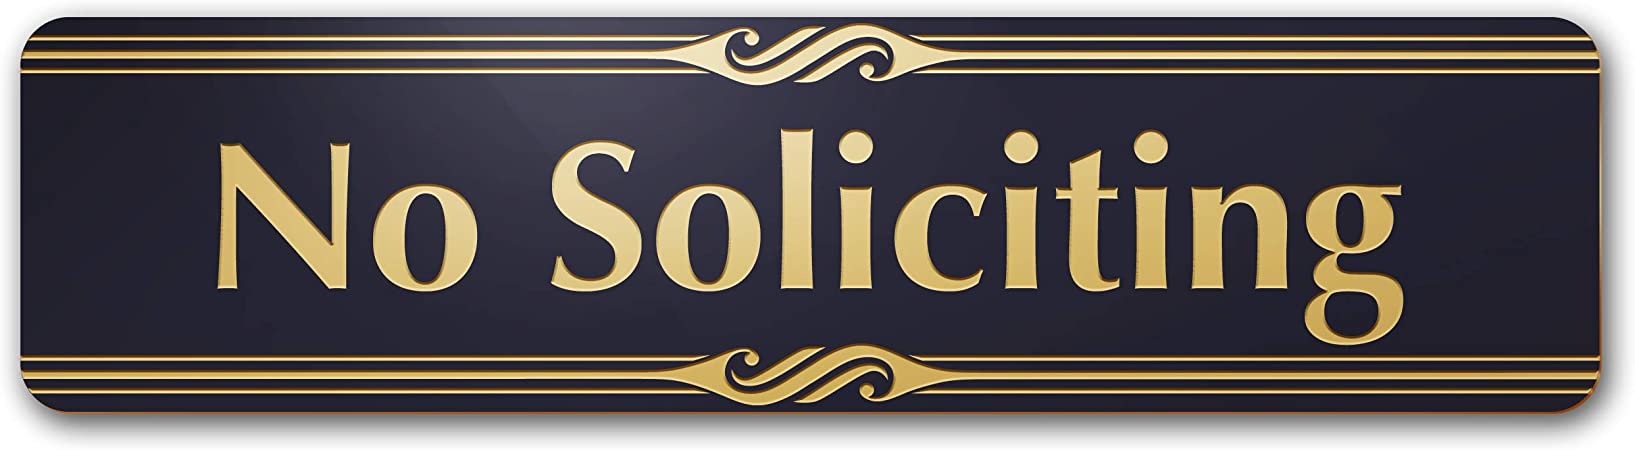 No Soliciting Laser Engraved Small Plastic Sign, 2" X 8" - Durable Black and Gold Finish - Indoor and Outdoor Use - A85-02-BG